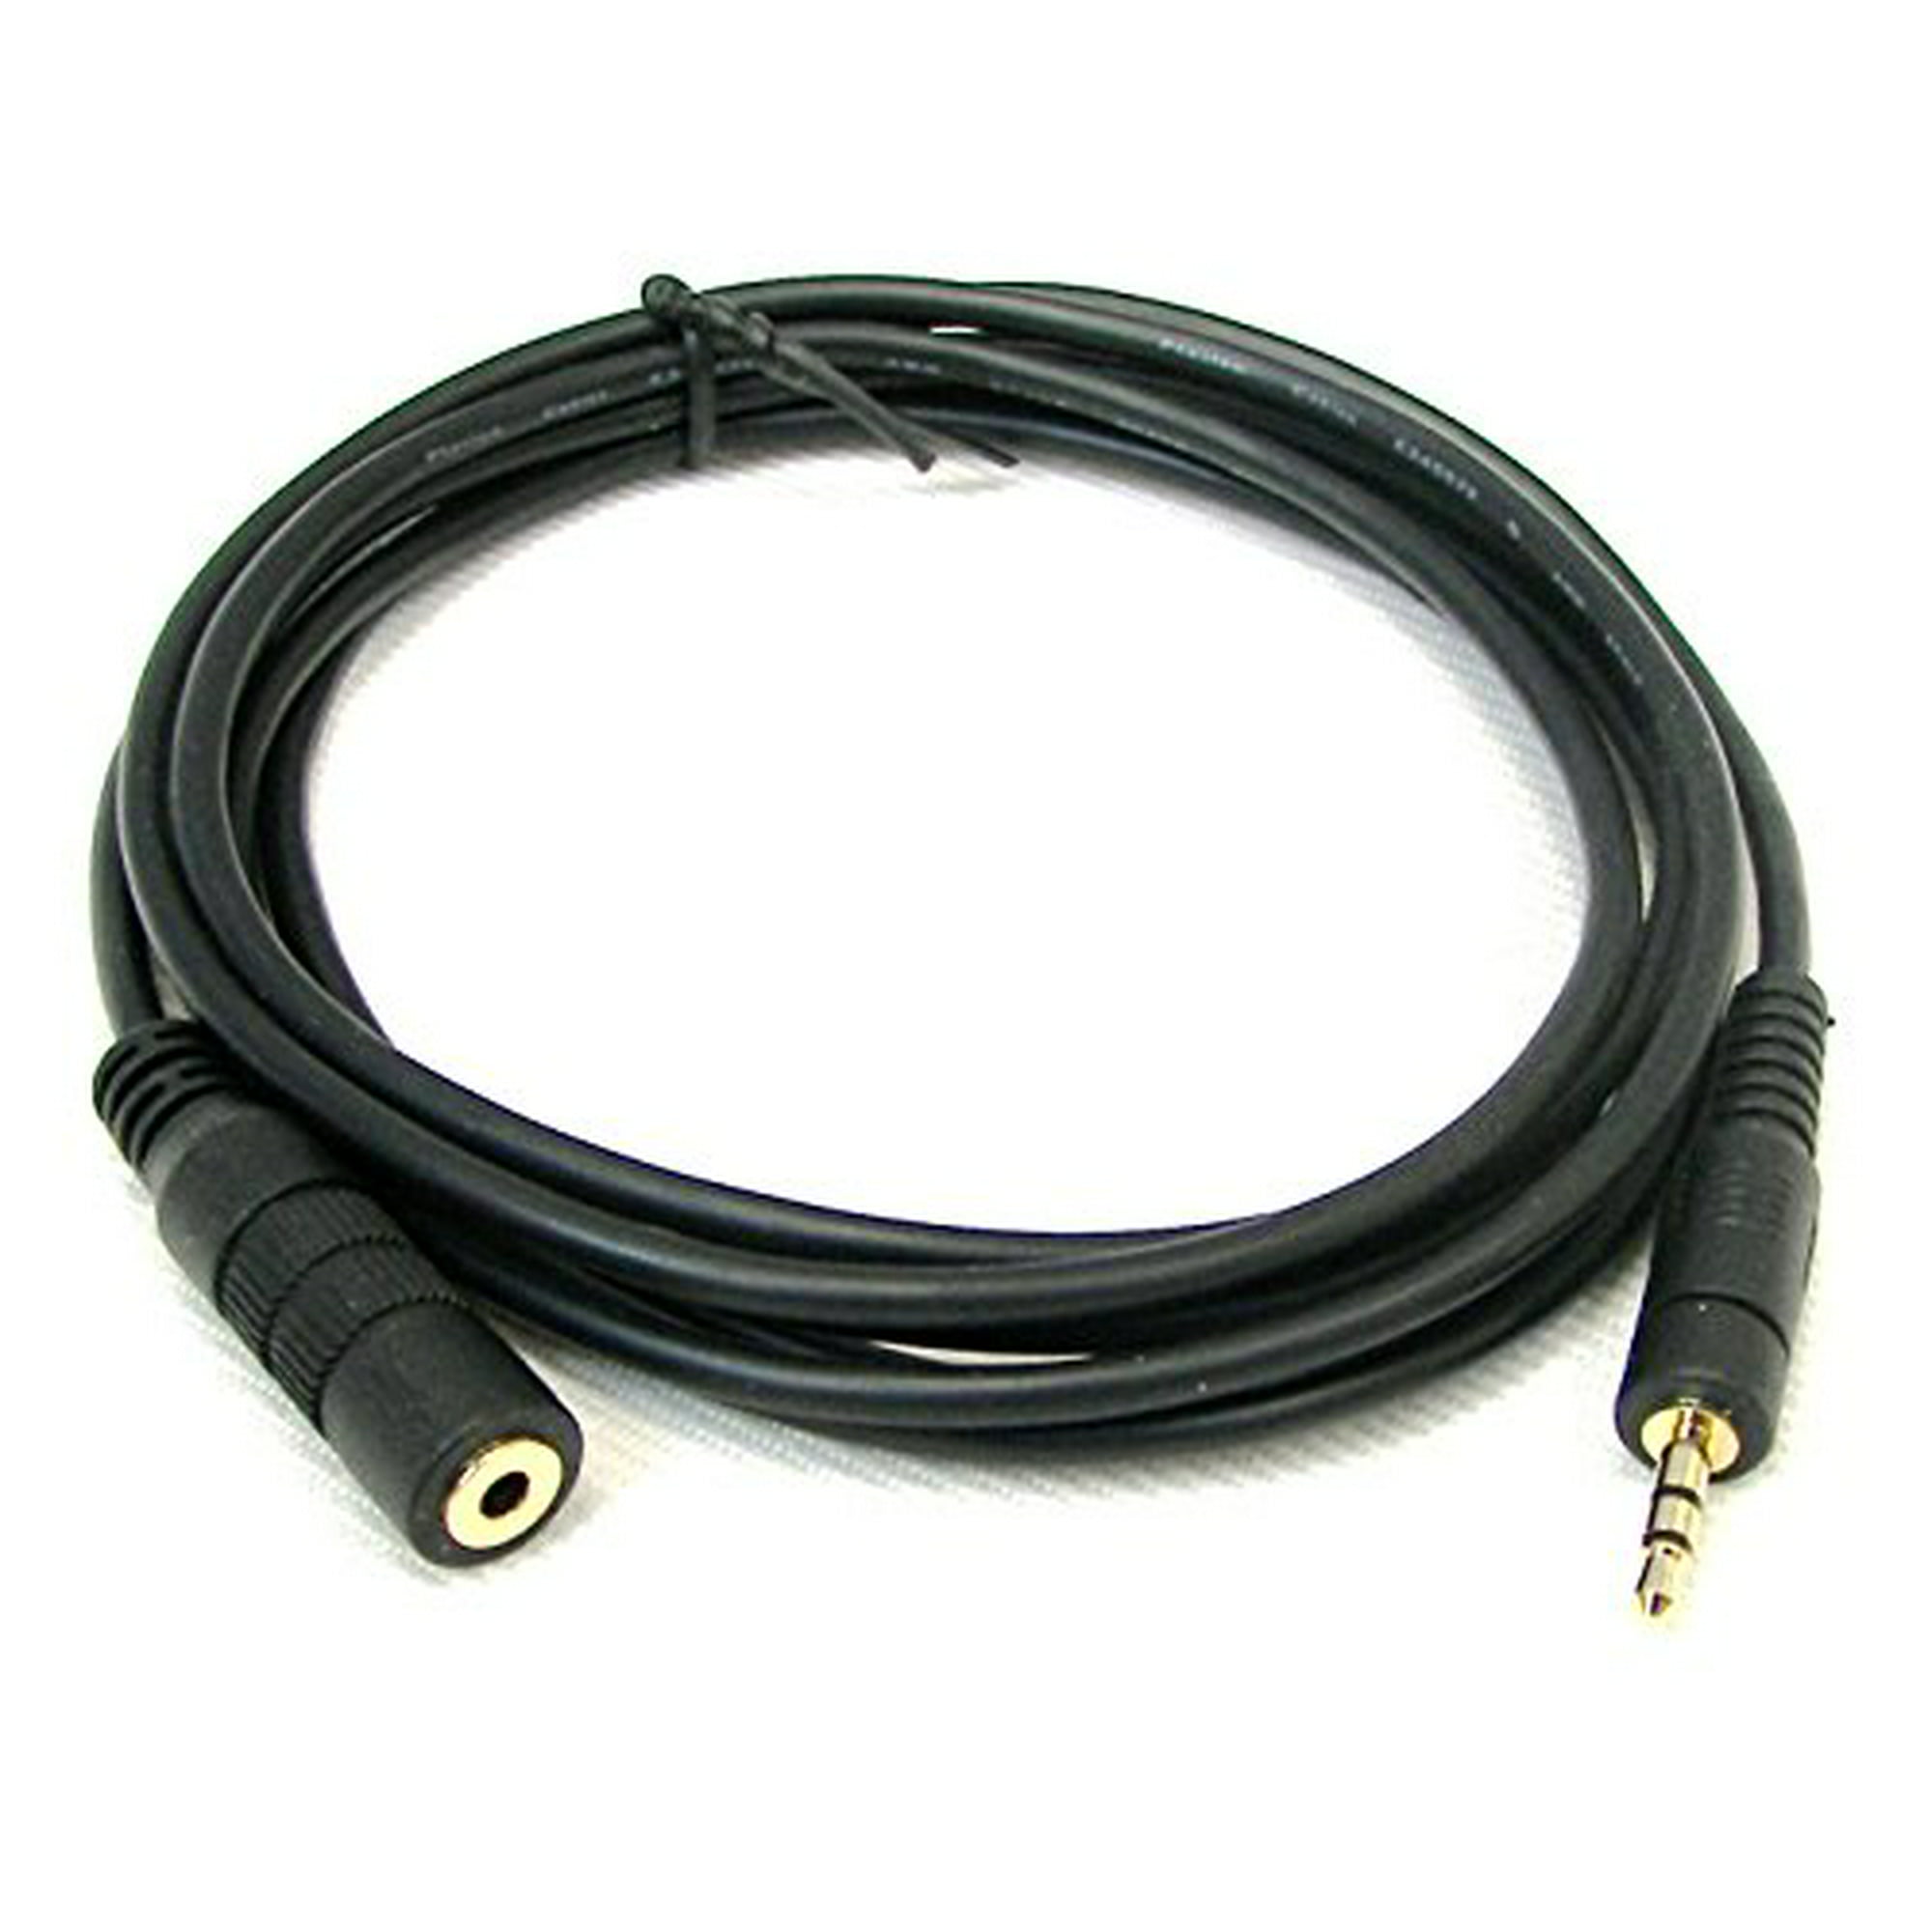 Nsi 12 Remote Extension Cable For Lanc Dvx And Control L Cameras And Camcorders From Canon Sony Jvc Panasonic Walmart Canada